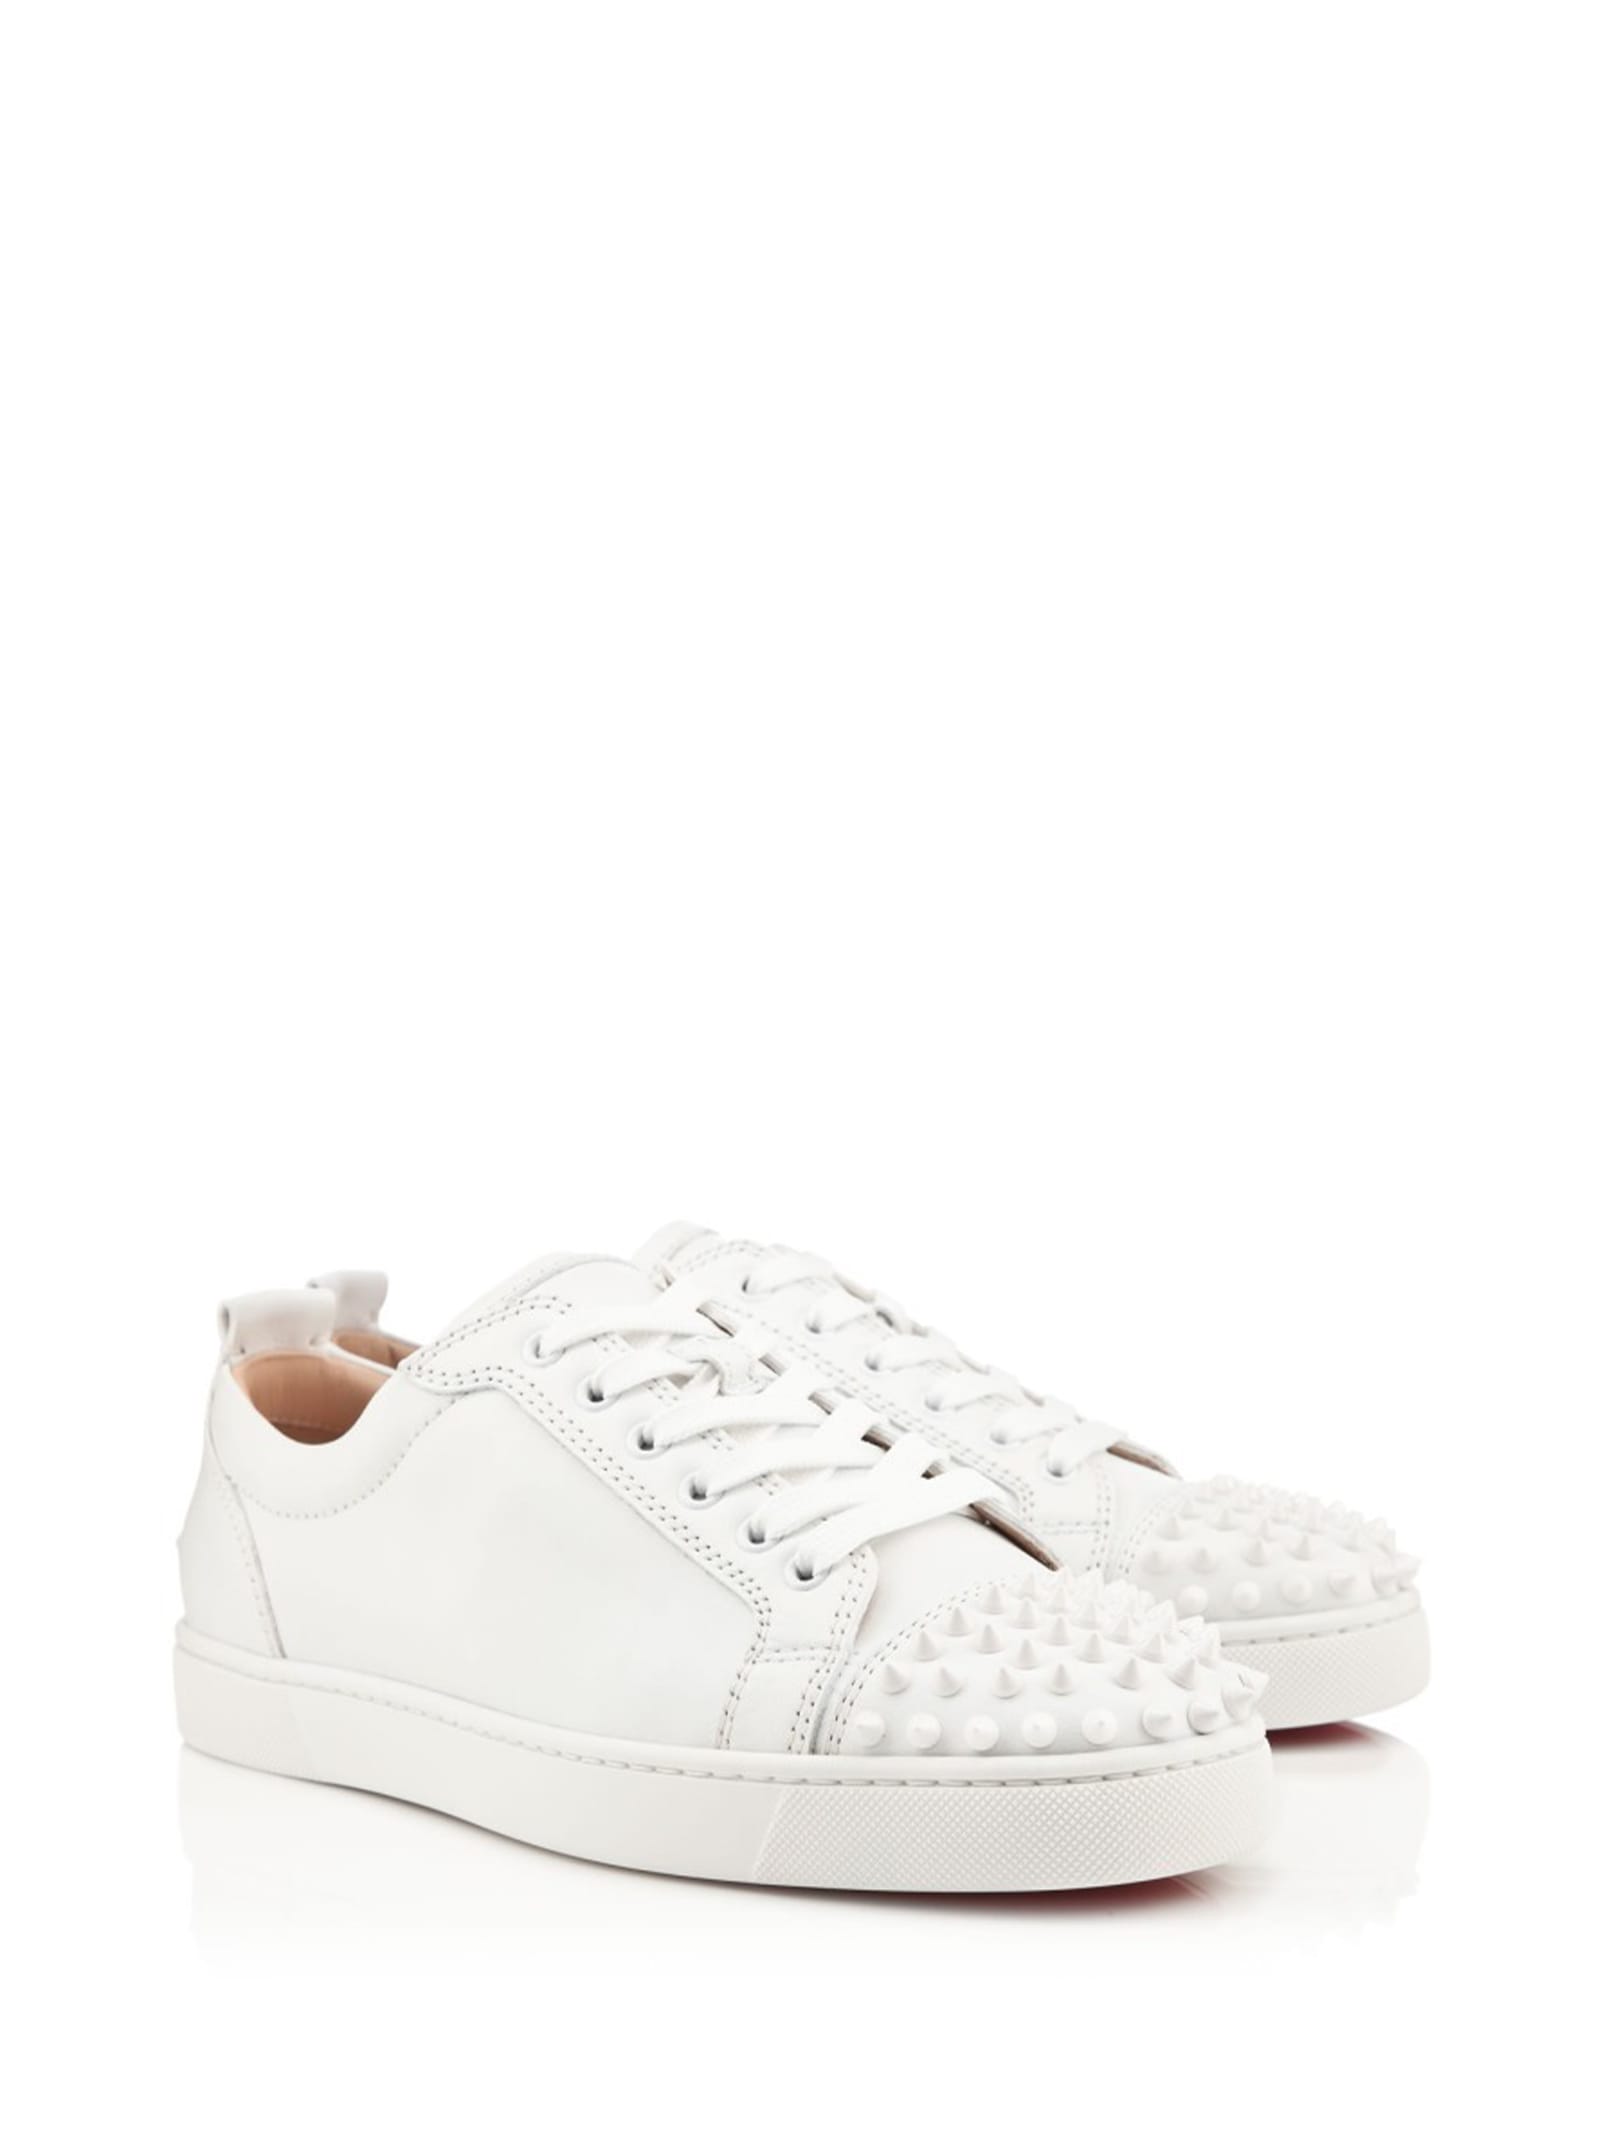 Shop Christian Louboutin Louis Sneakers With Spikes In White White